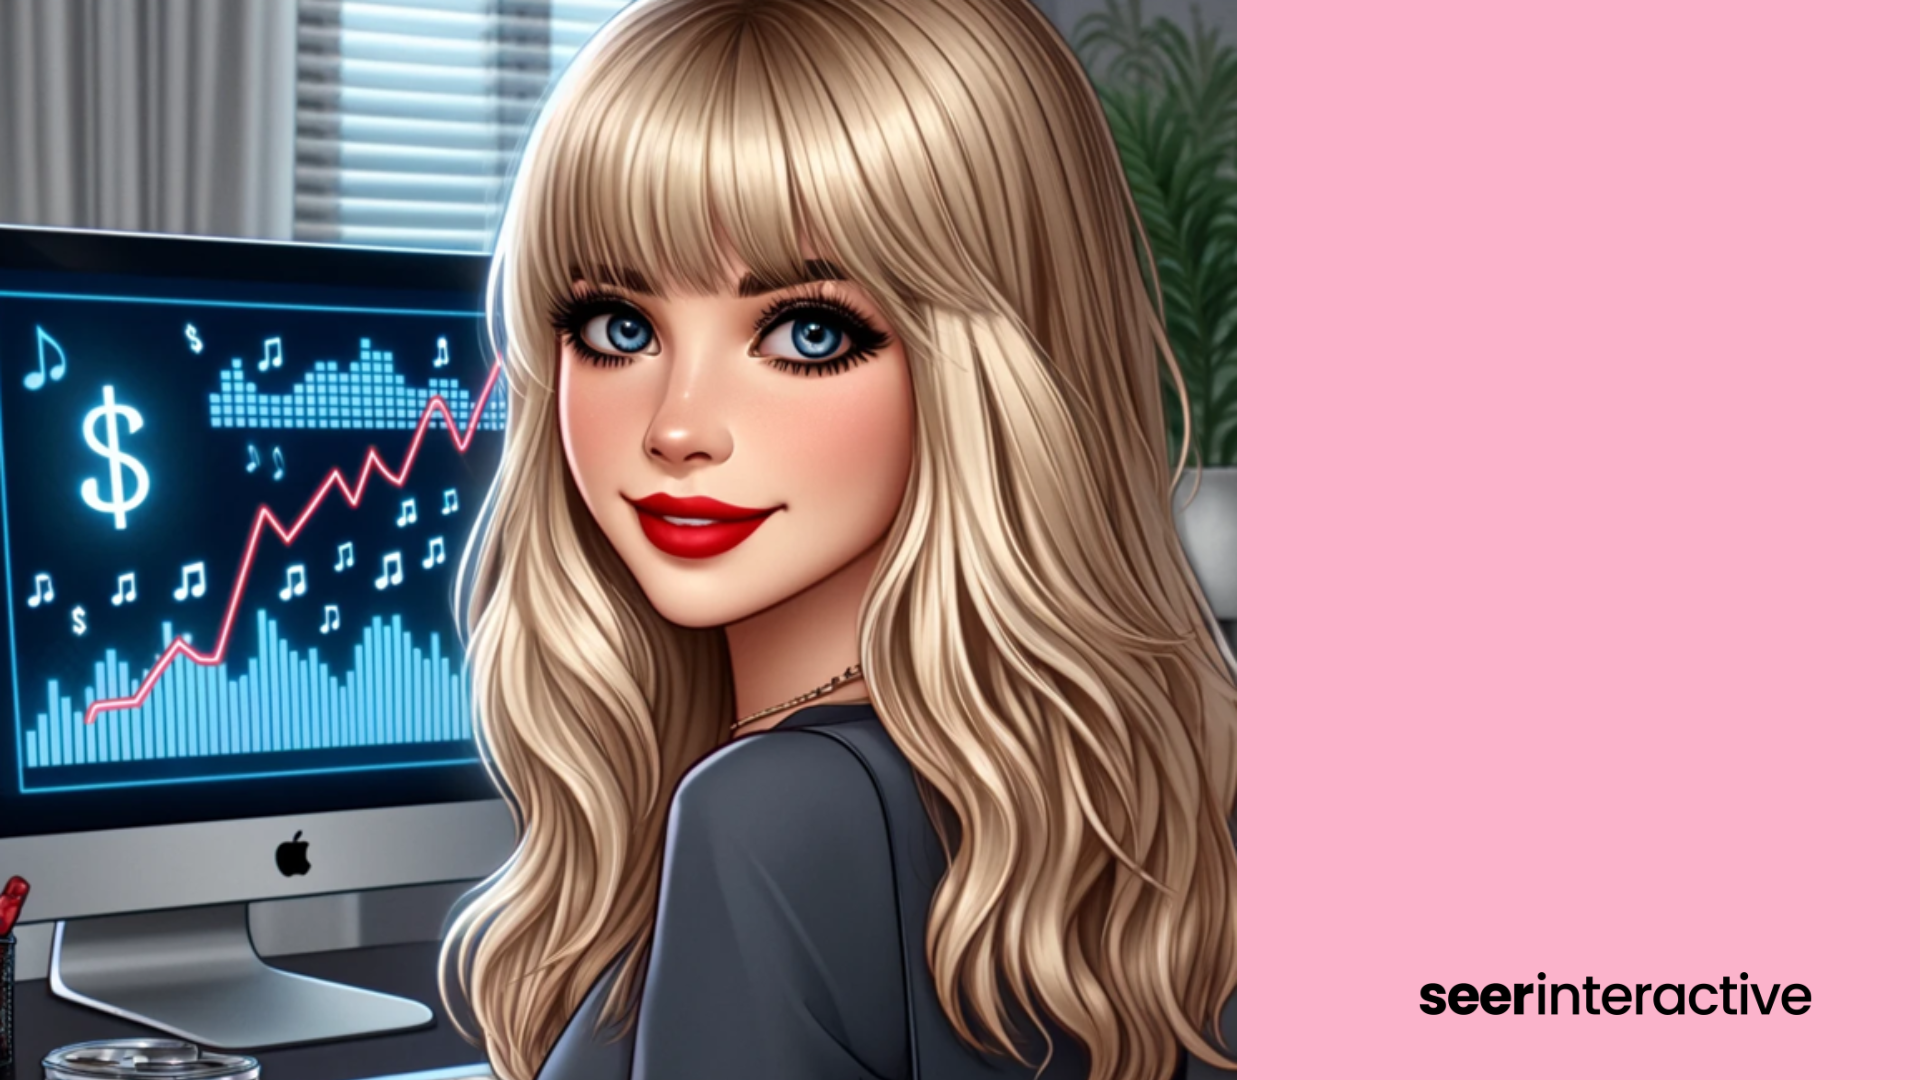 Guide to Marketing, Inspired by Taylor Swift (Seer’s Version)